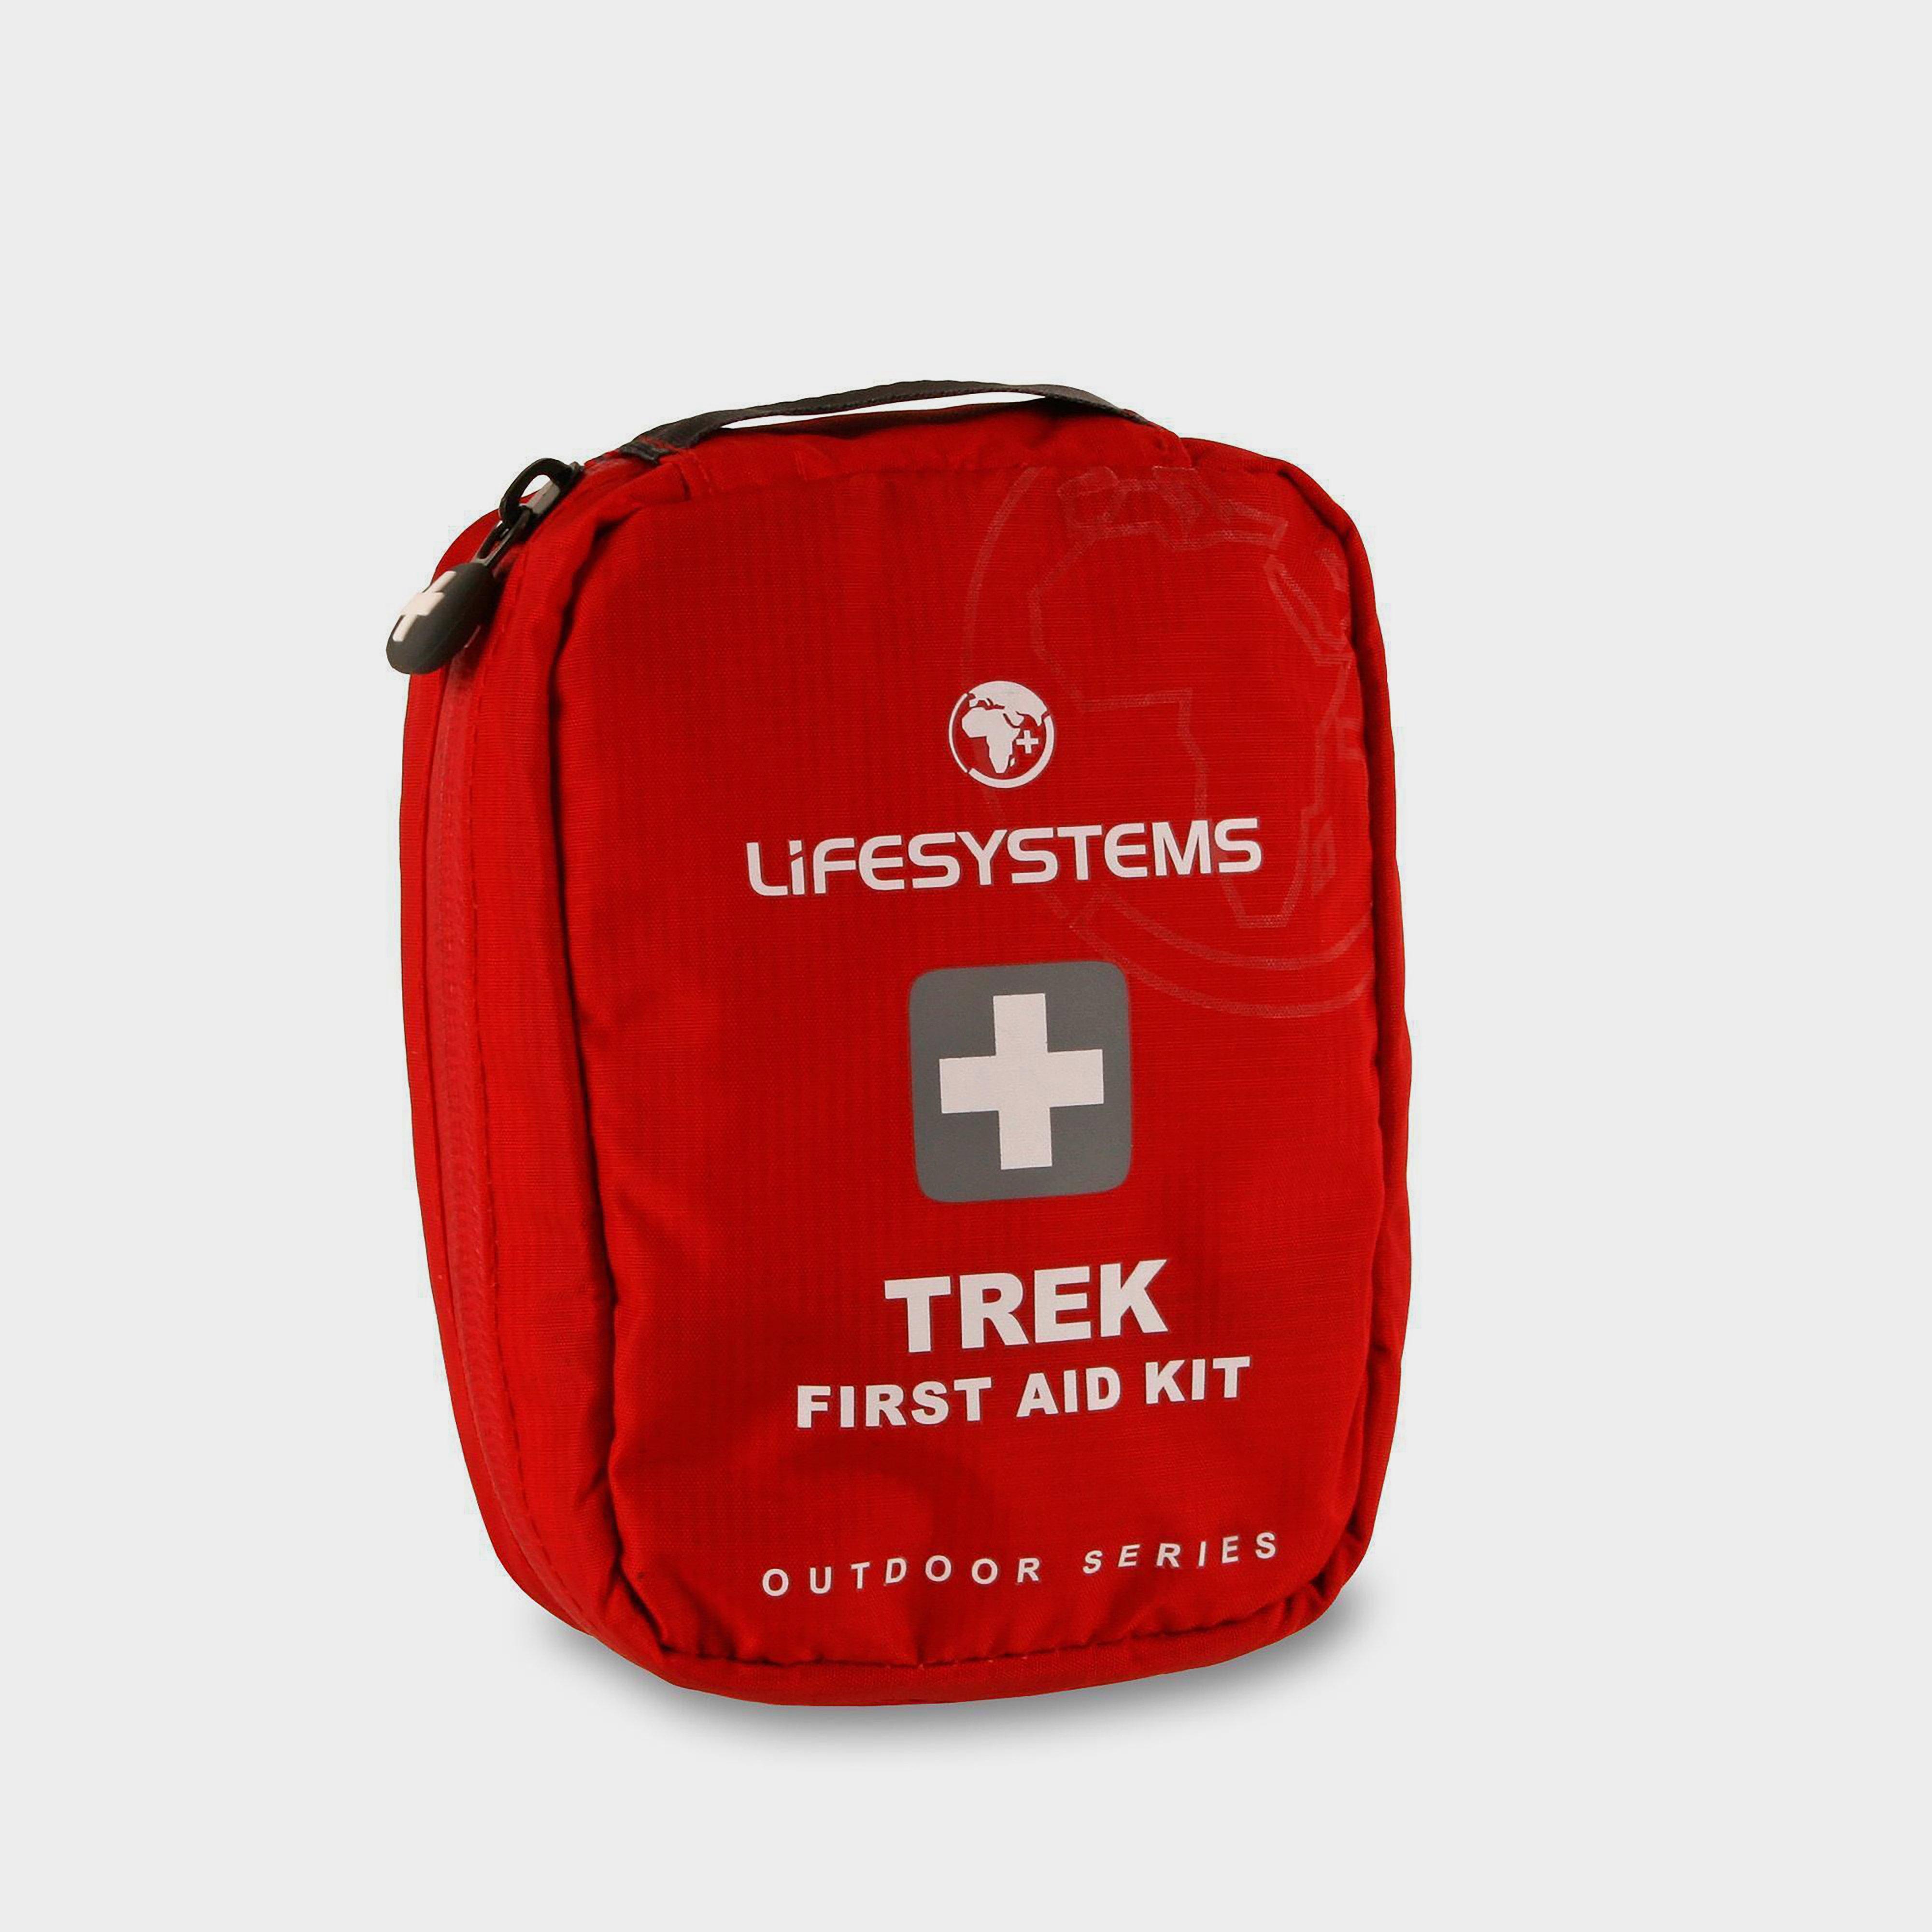 Lifesystems Trek First Aid Kit - Red  Red